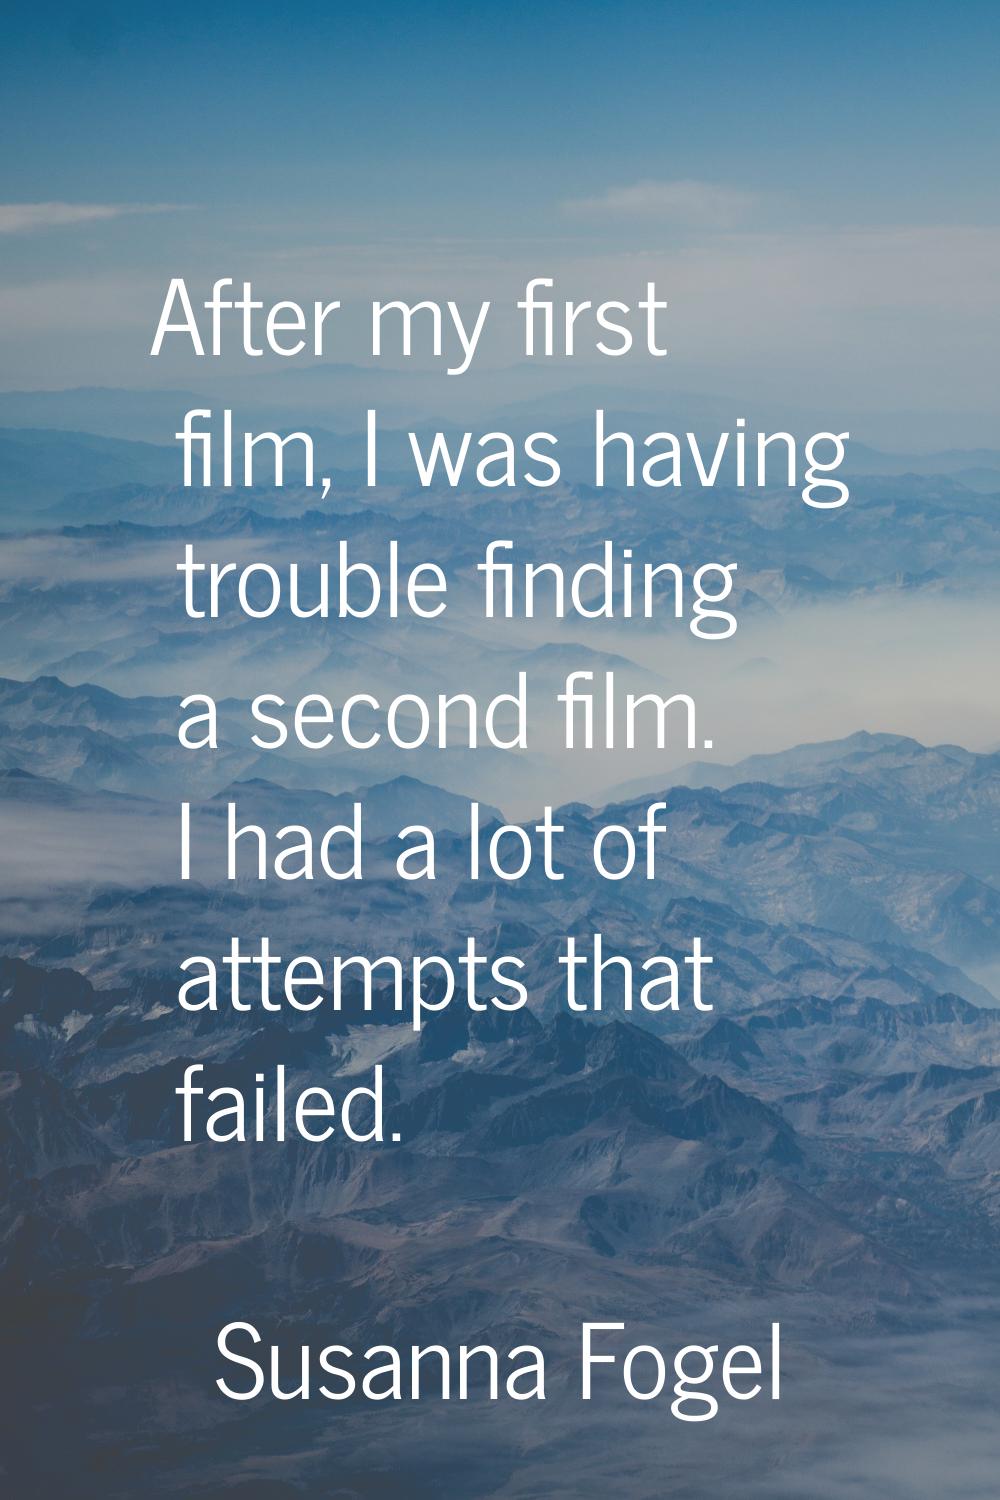 After my first film, I was having trouble finding a second film. I had a lot of attempts that faile